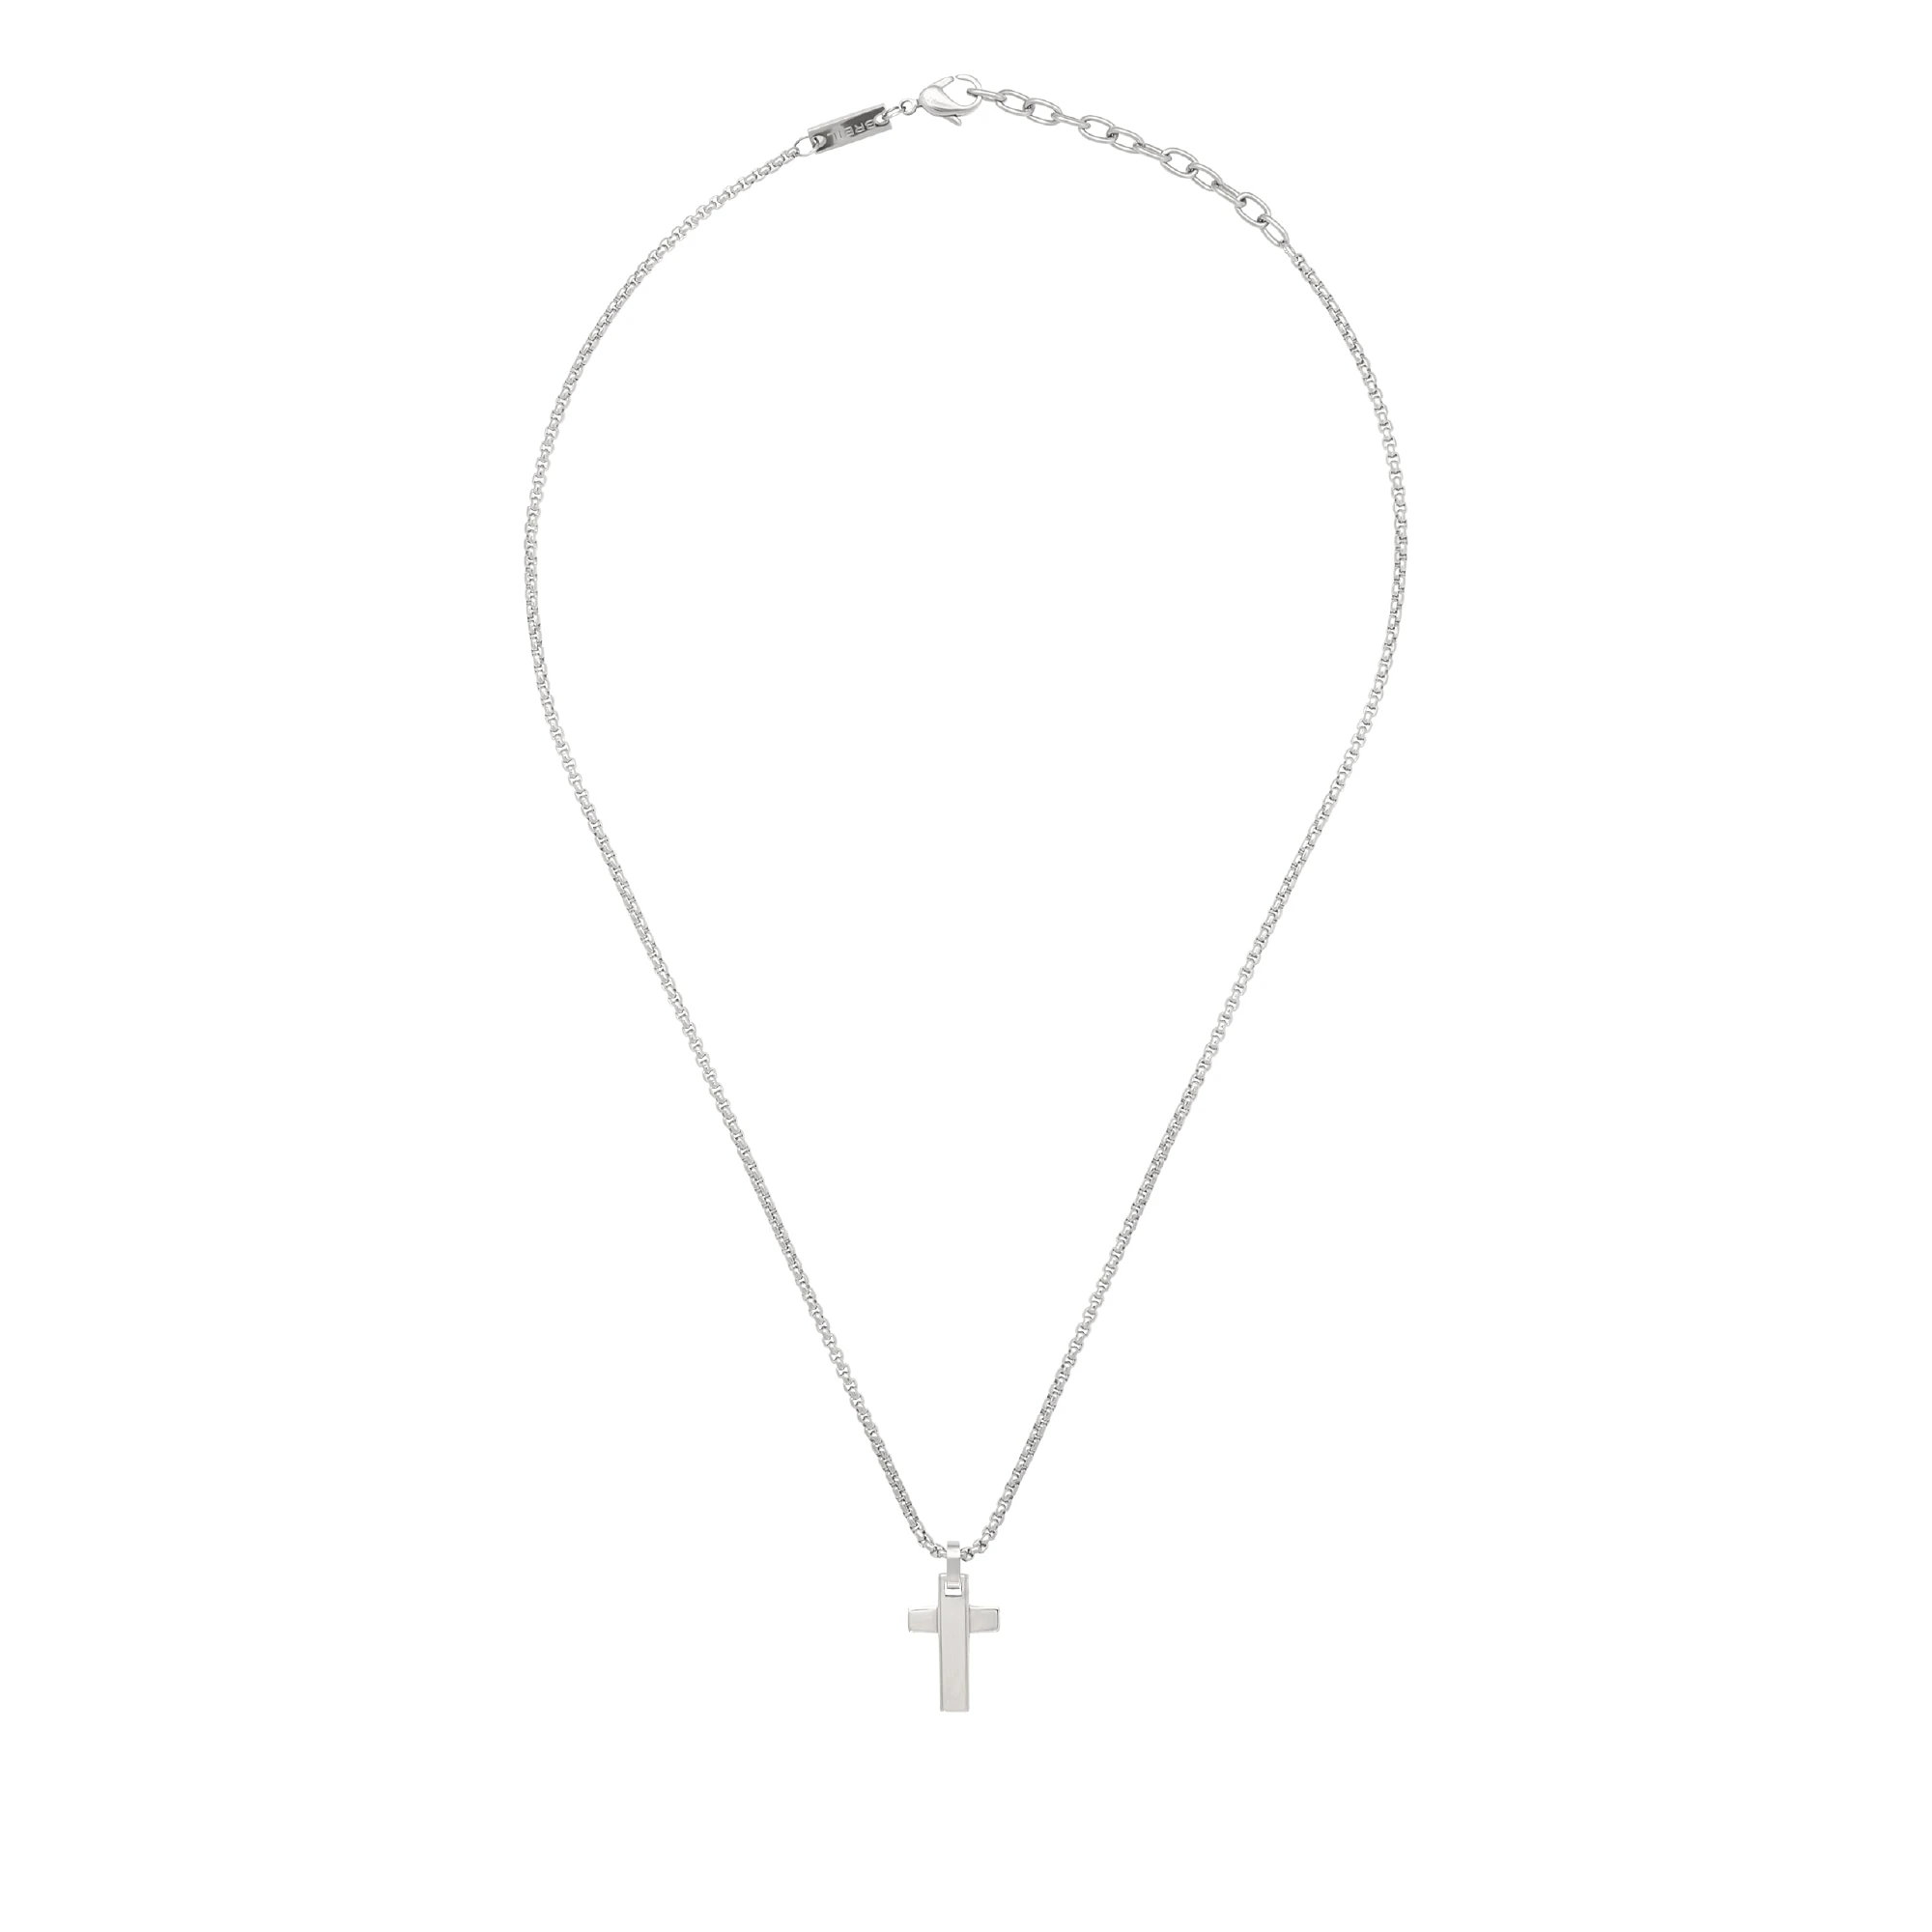 TAG AND CROSS - STAINLESS STEEL NECKLACE WITH PENDANT - 1 - TJ3228 | Breil